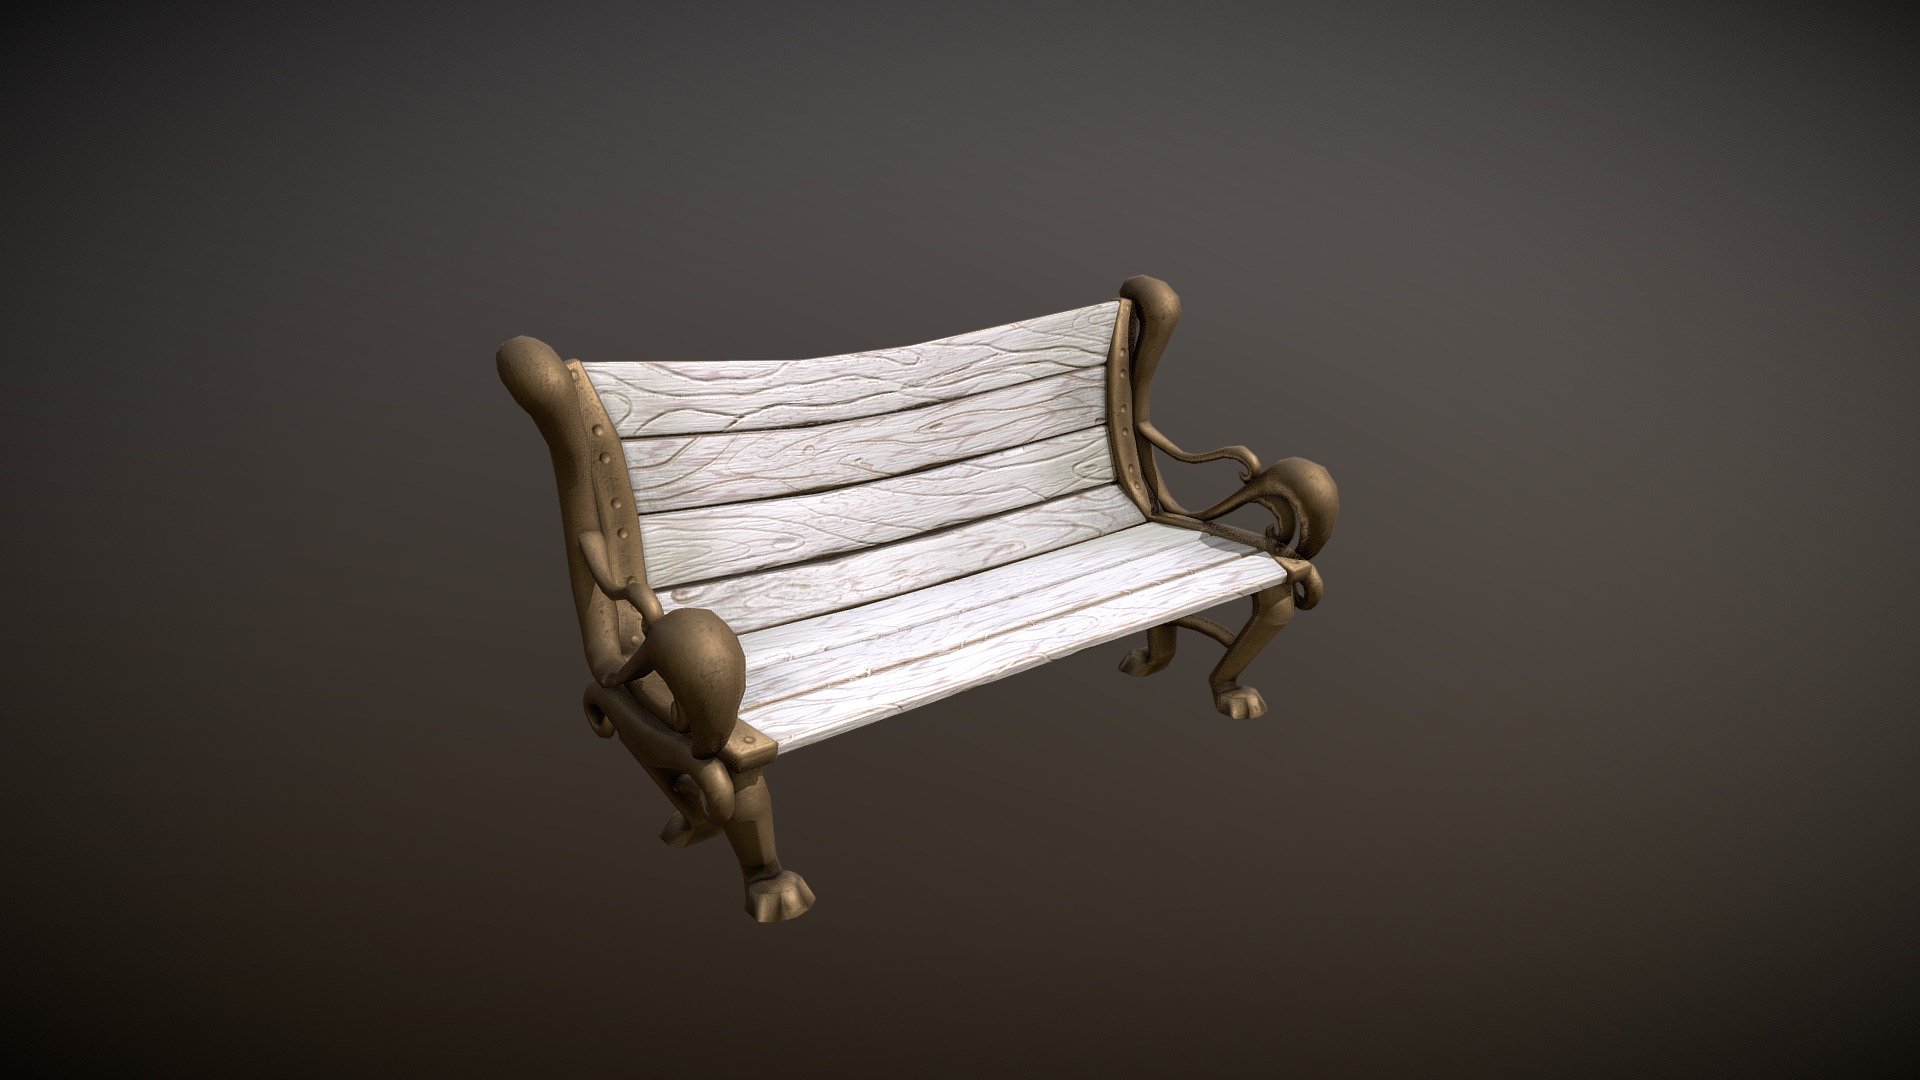 A heavly stylized and hand painted bench.

Low poly

Triangles: 3,602

Set of 2k textures (so you can reduce texture size to own requirements) includes: Metal, Roughness, Normal, Base color - Stylized bench - Download Free 3D model by Murthag997 3d model